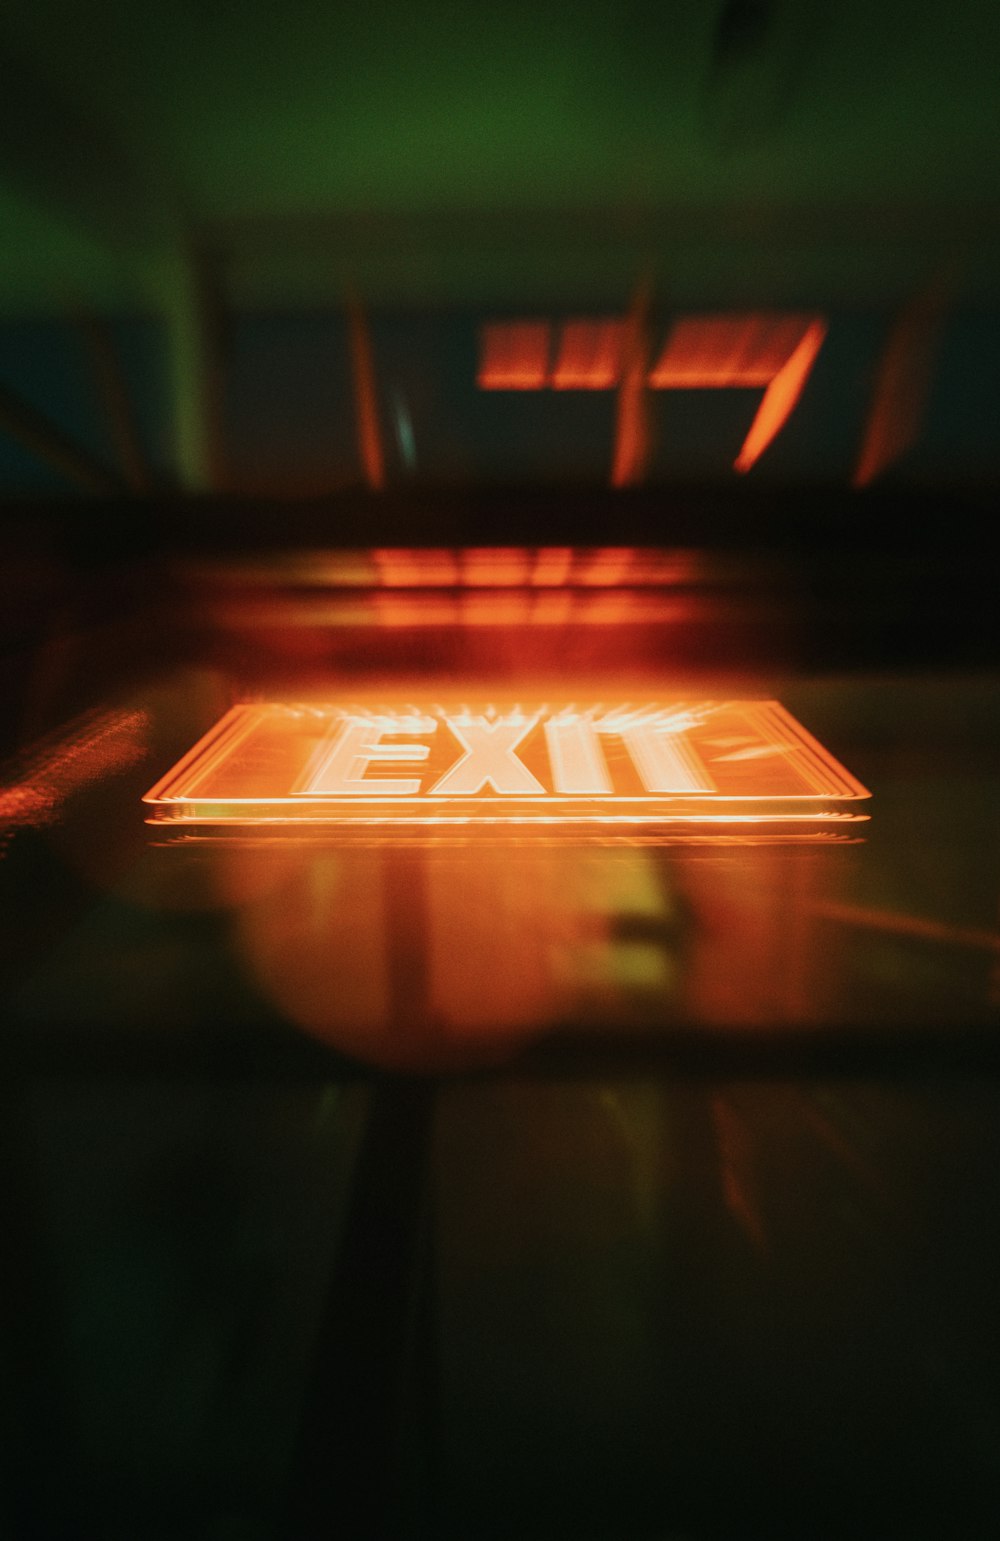 an exit sign is seen through a window